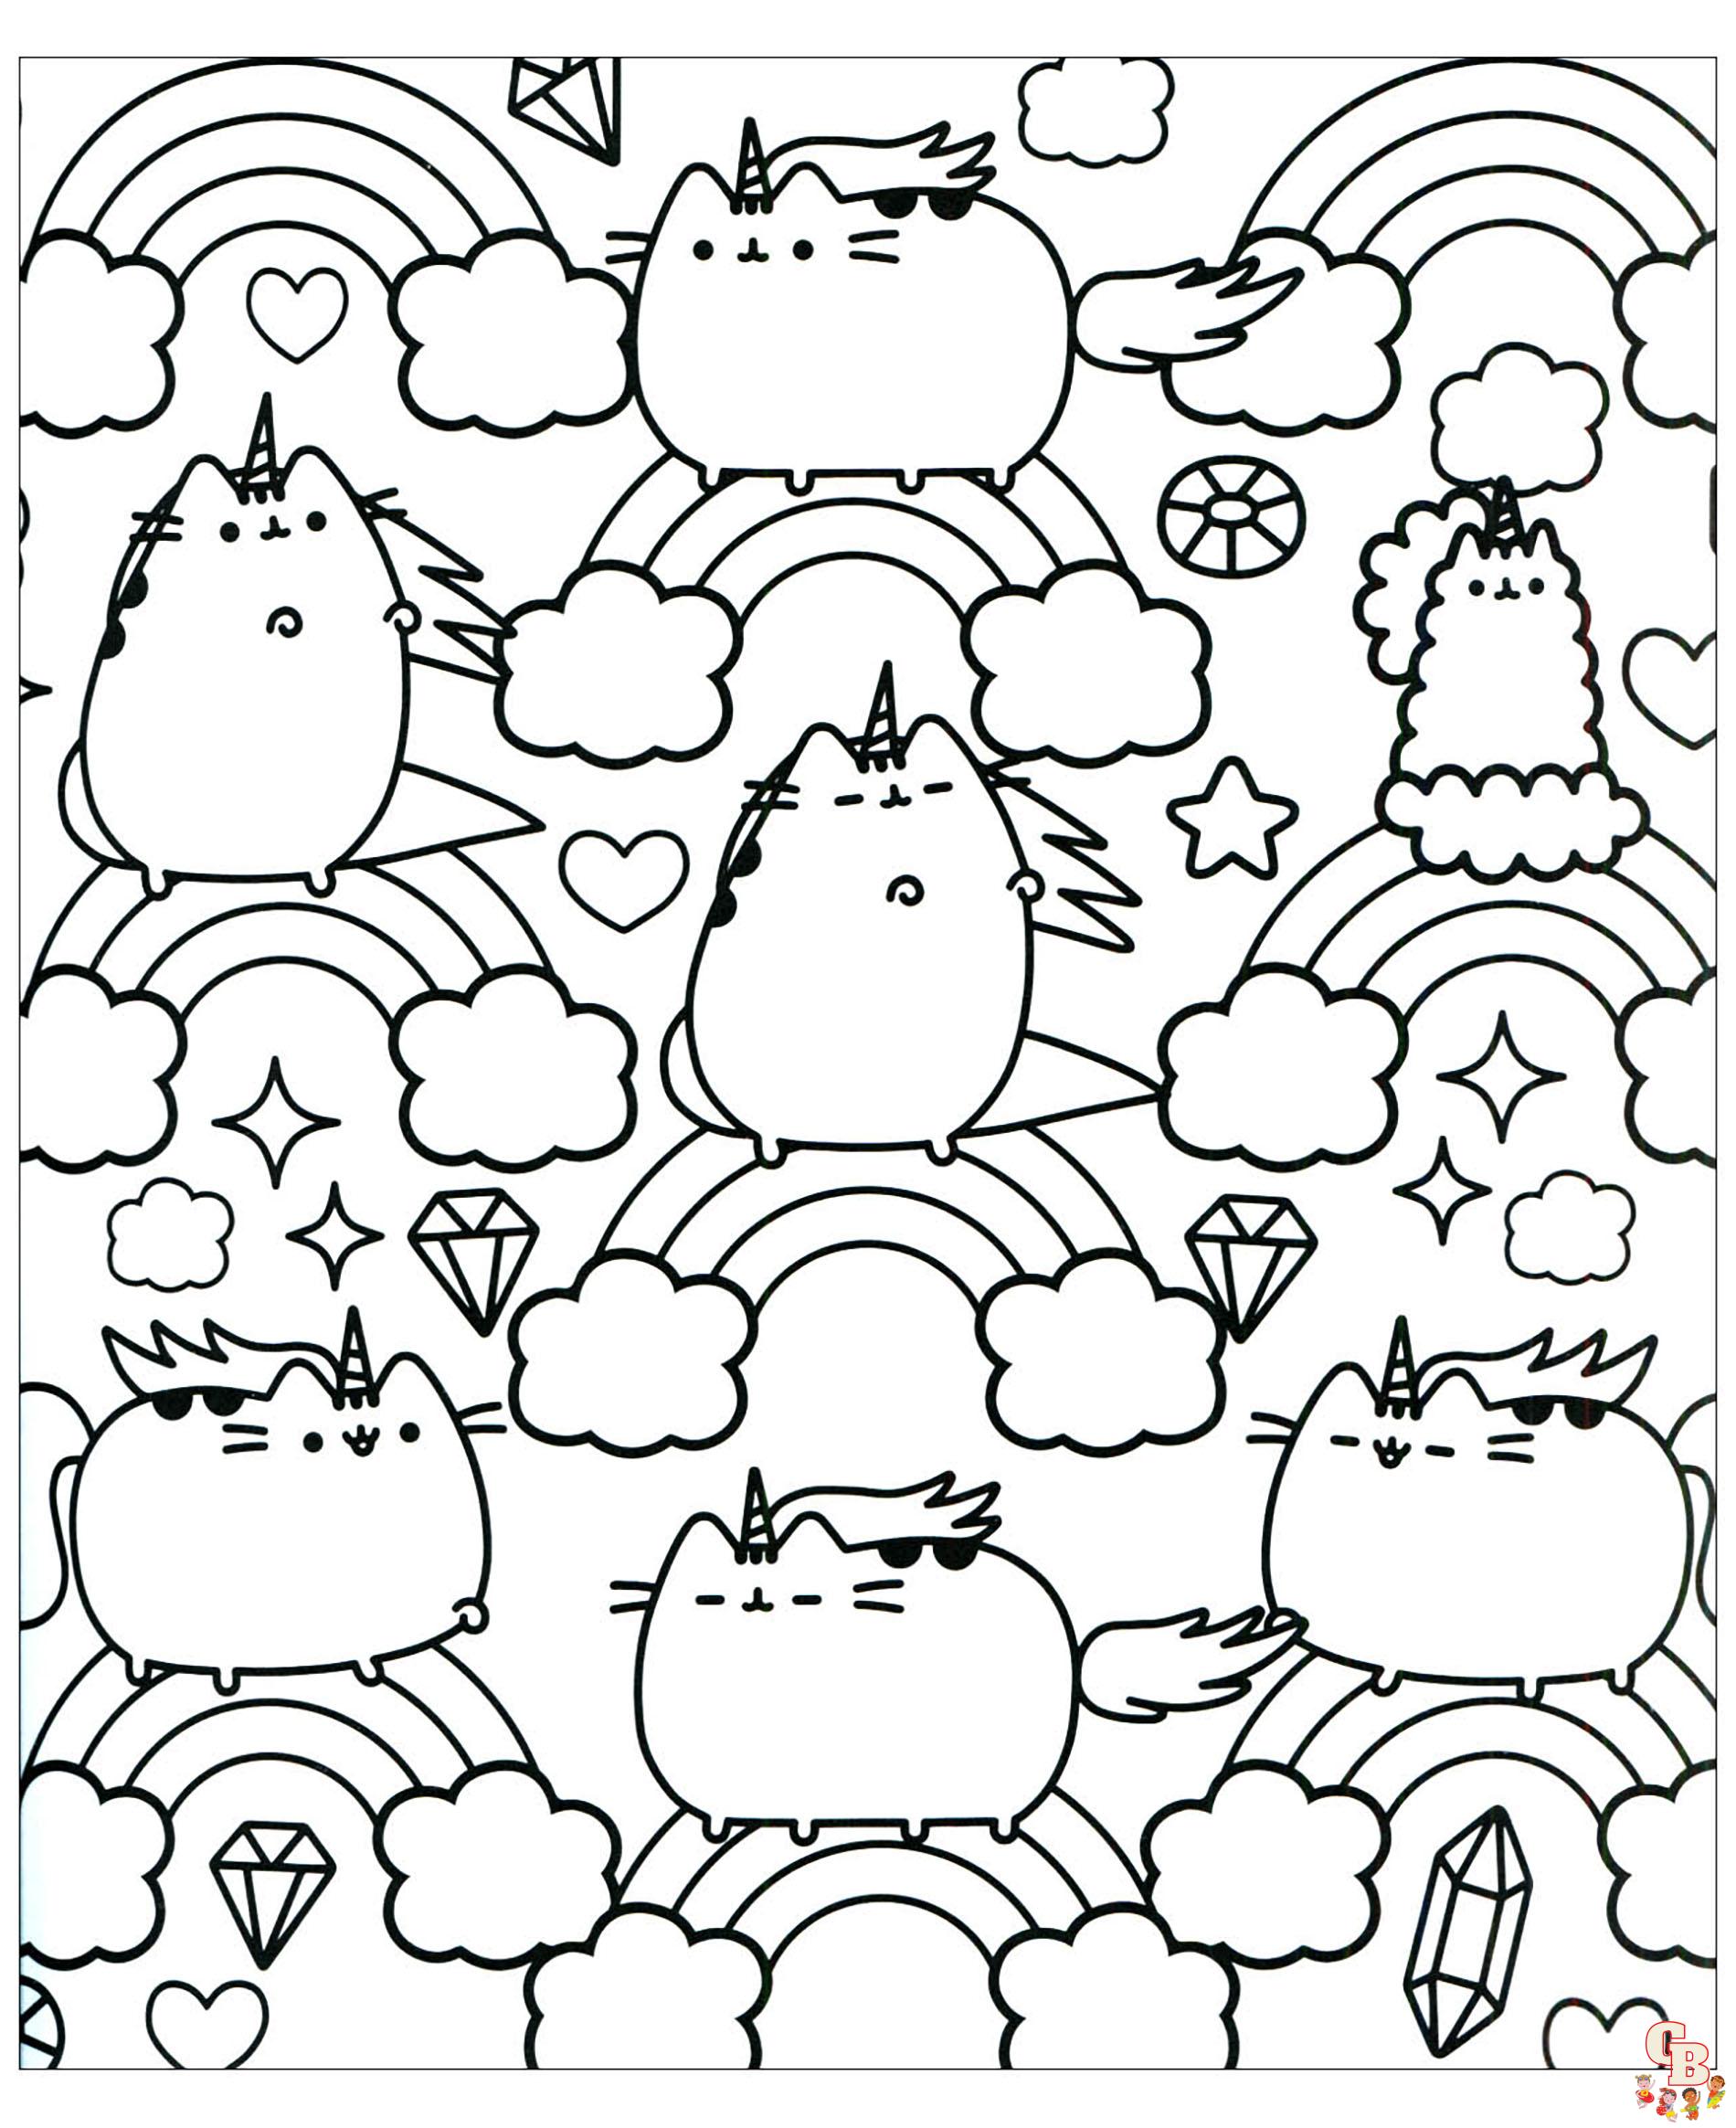 Three Lovely Pusheen Coloring Pages 4